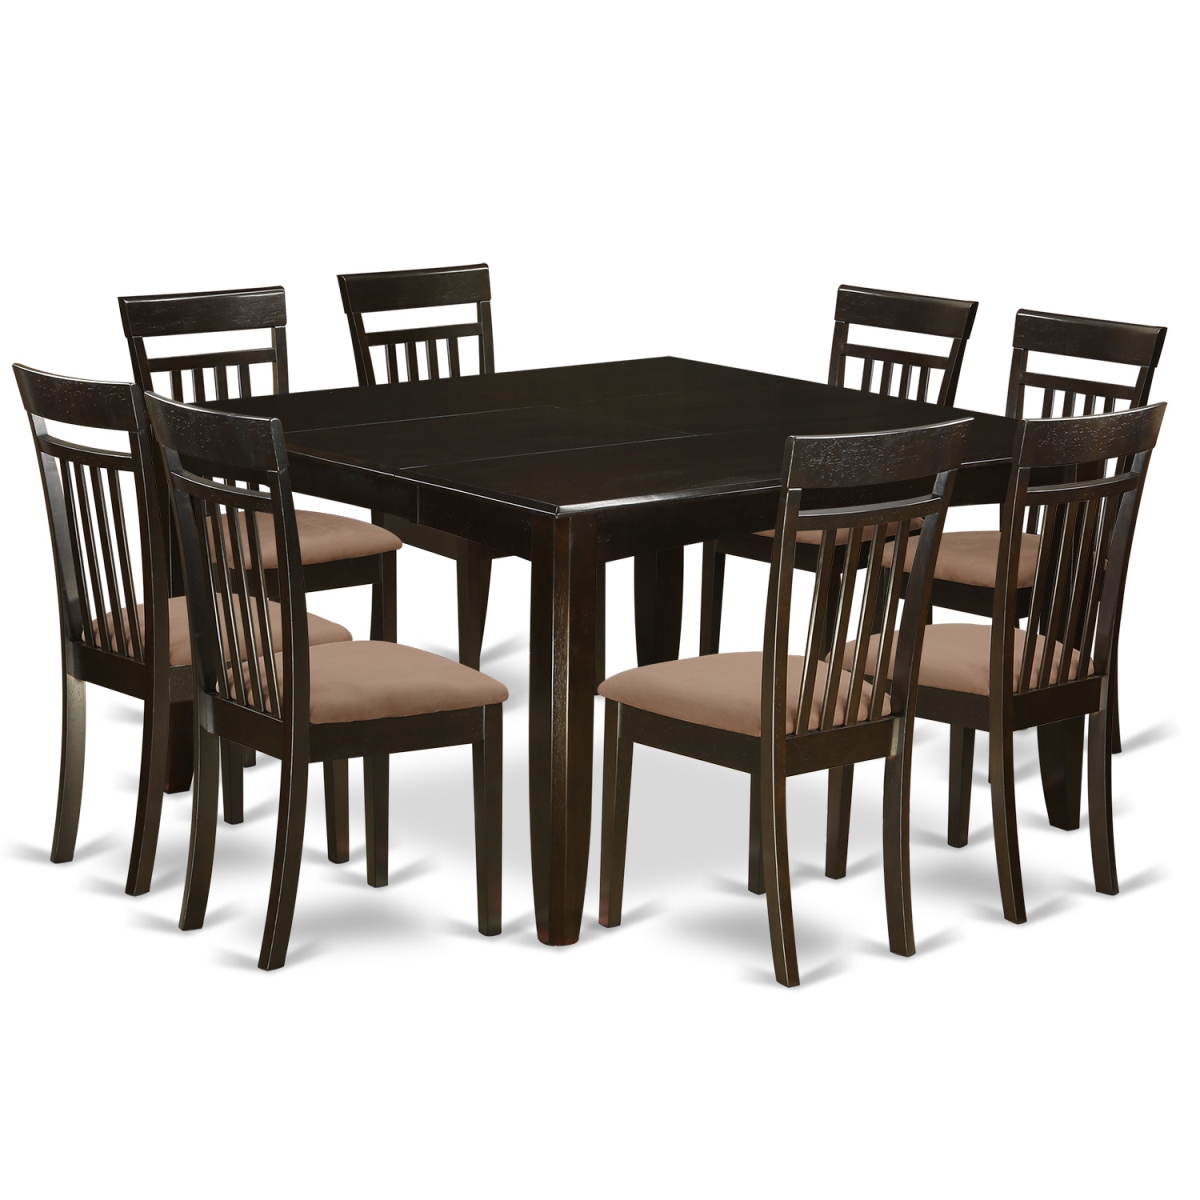 PFCA9-CAP-C Dining Room Set for 8-Dinette Table with Leaf & 8 Dinette Chairs, 9 piece - Cappuccino -  East West Furniture